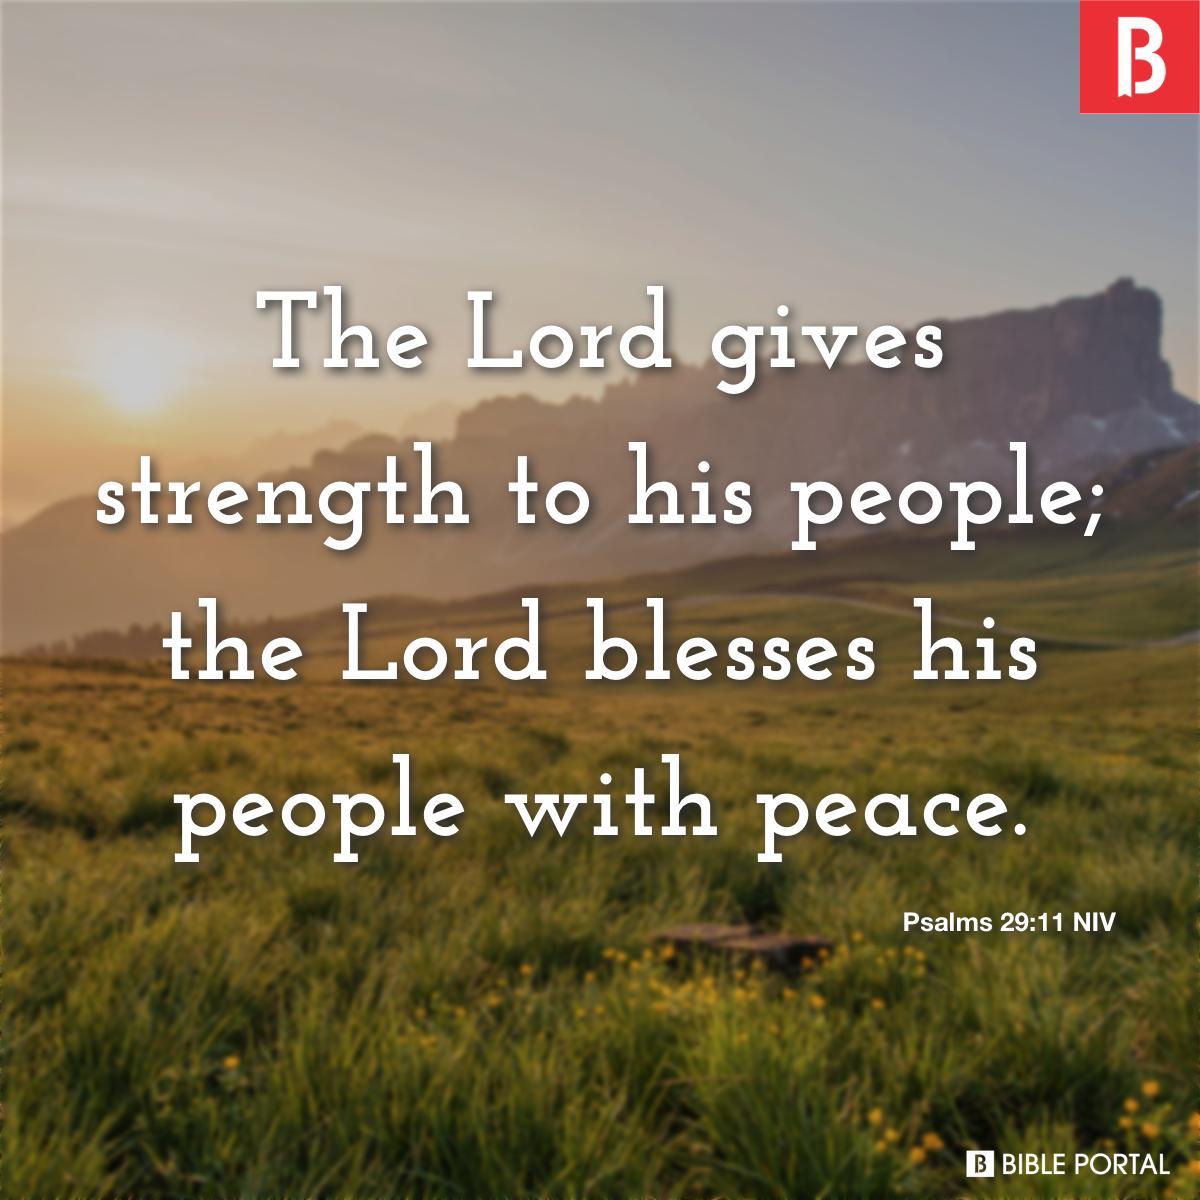 Bible verse of the day - November 25, 2022 - Psalm 29:11